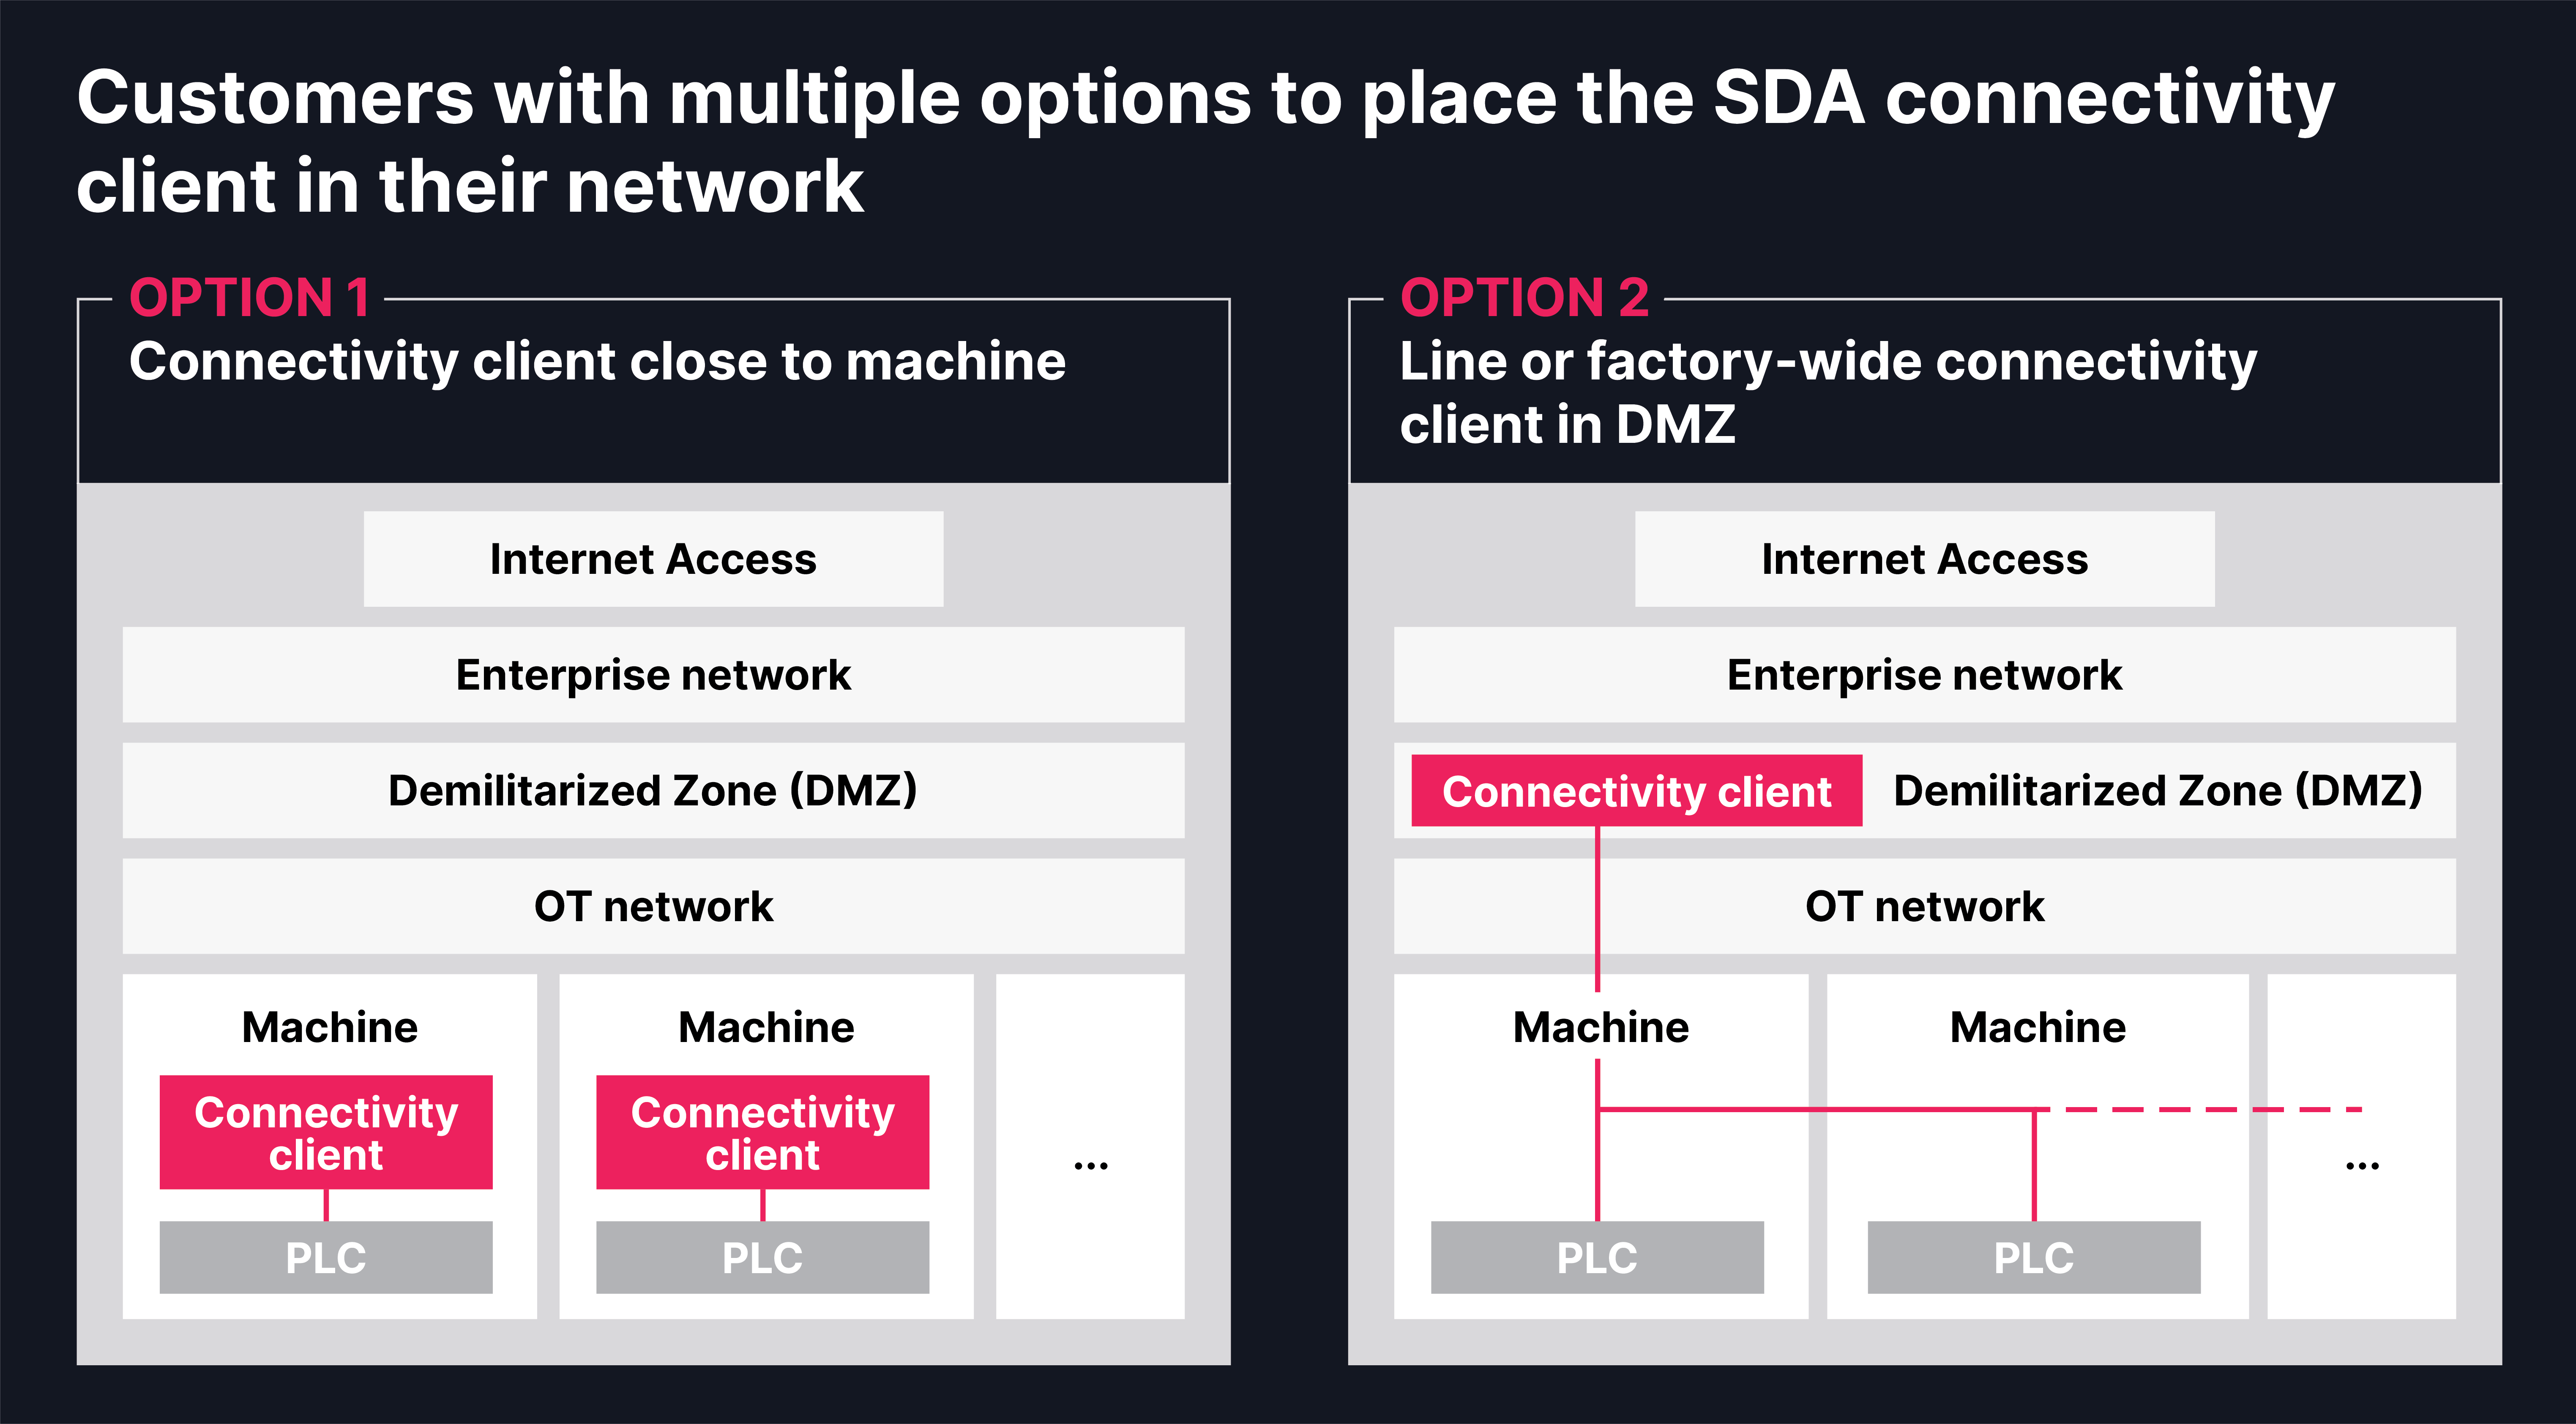 Schematic network architectures with SDA connectivity client